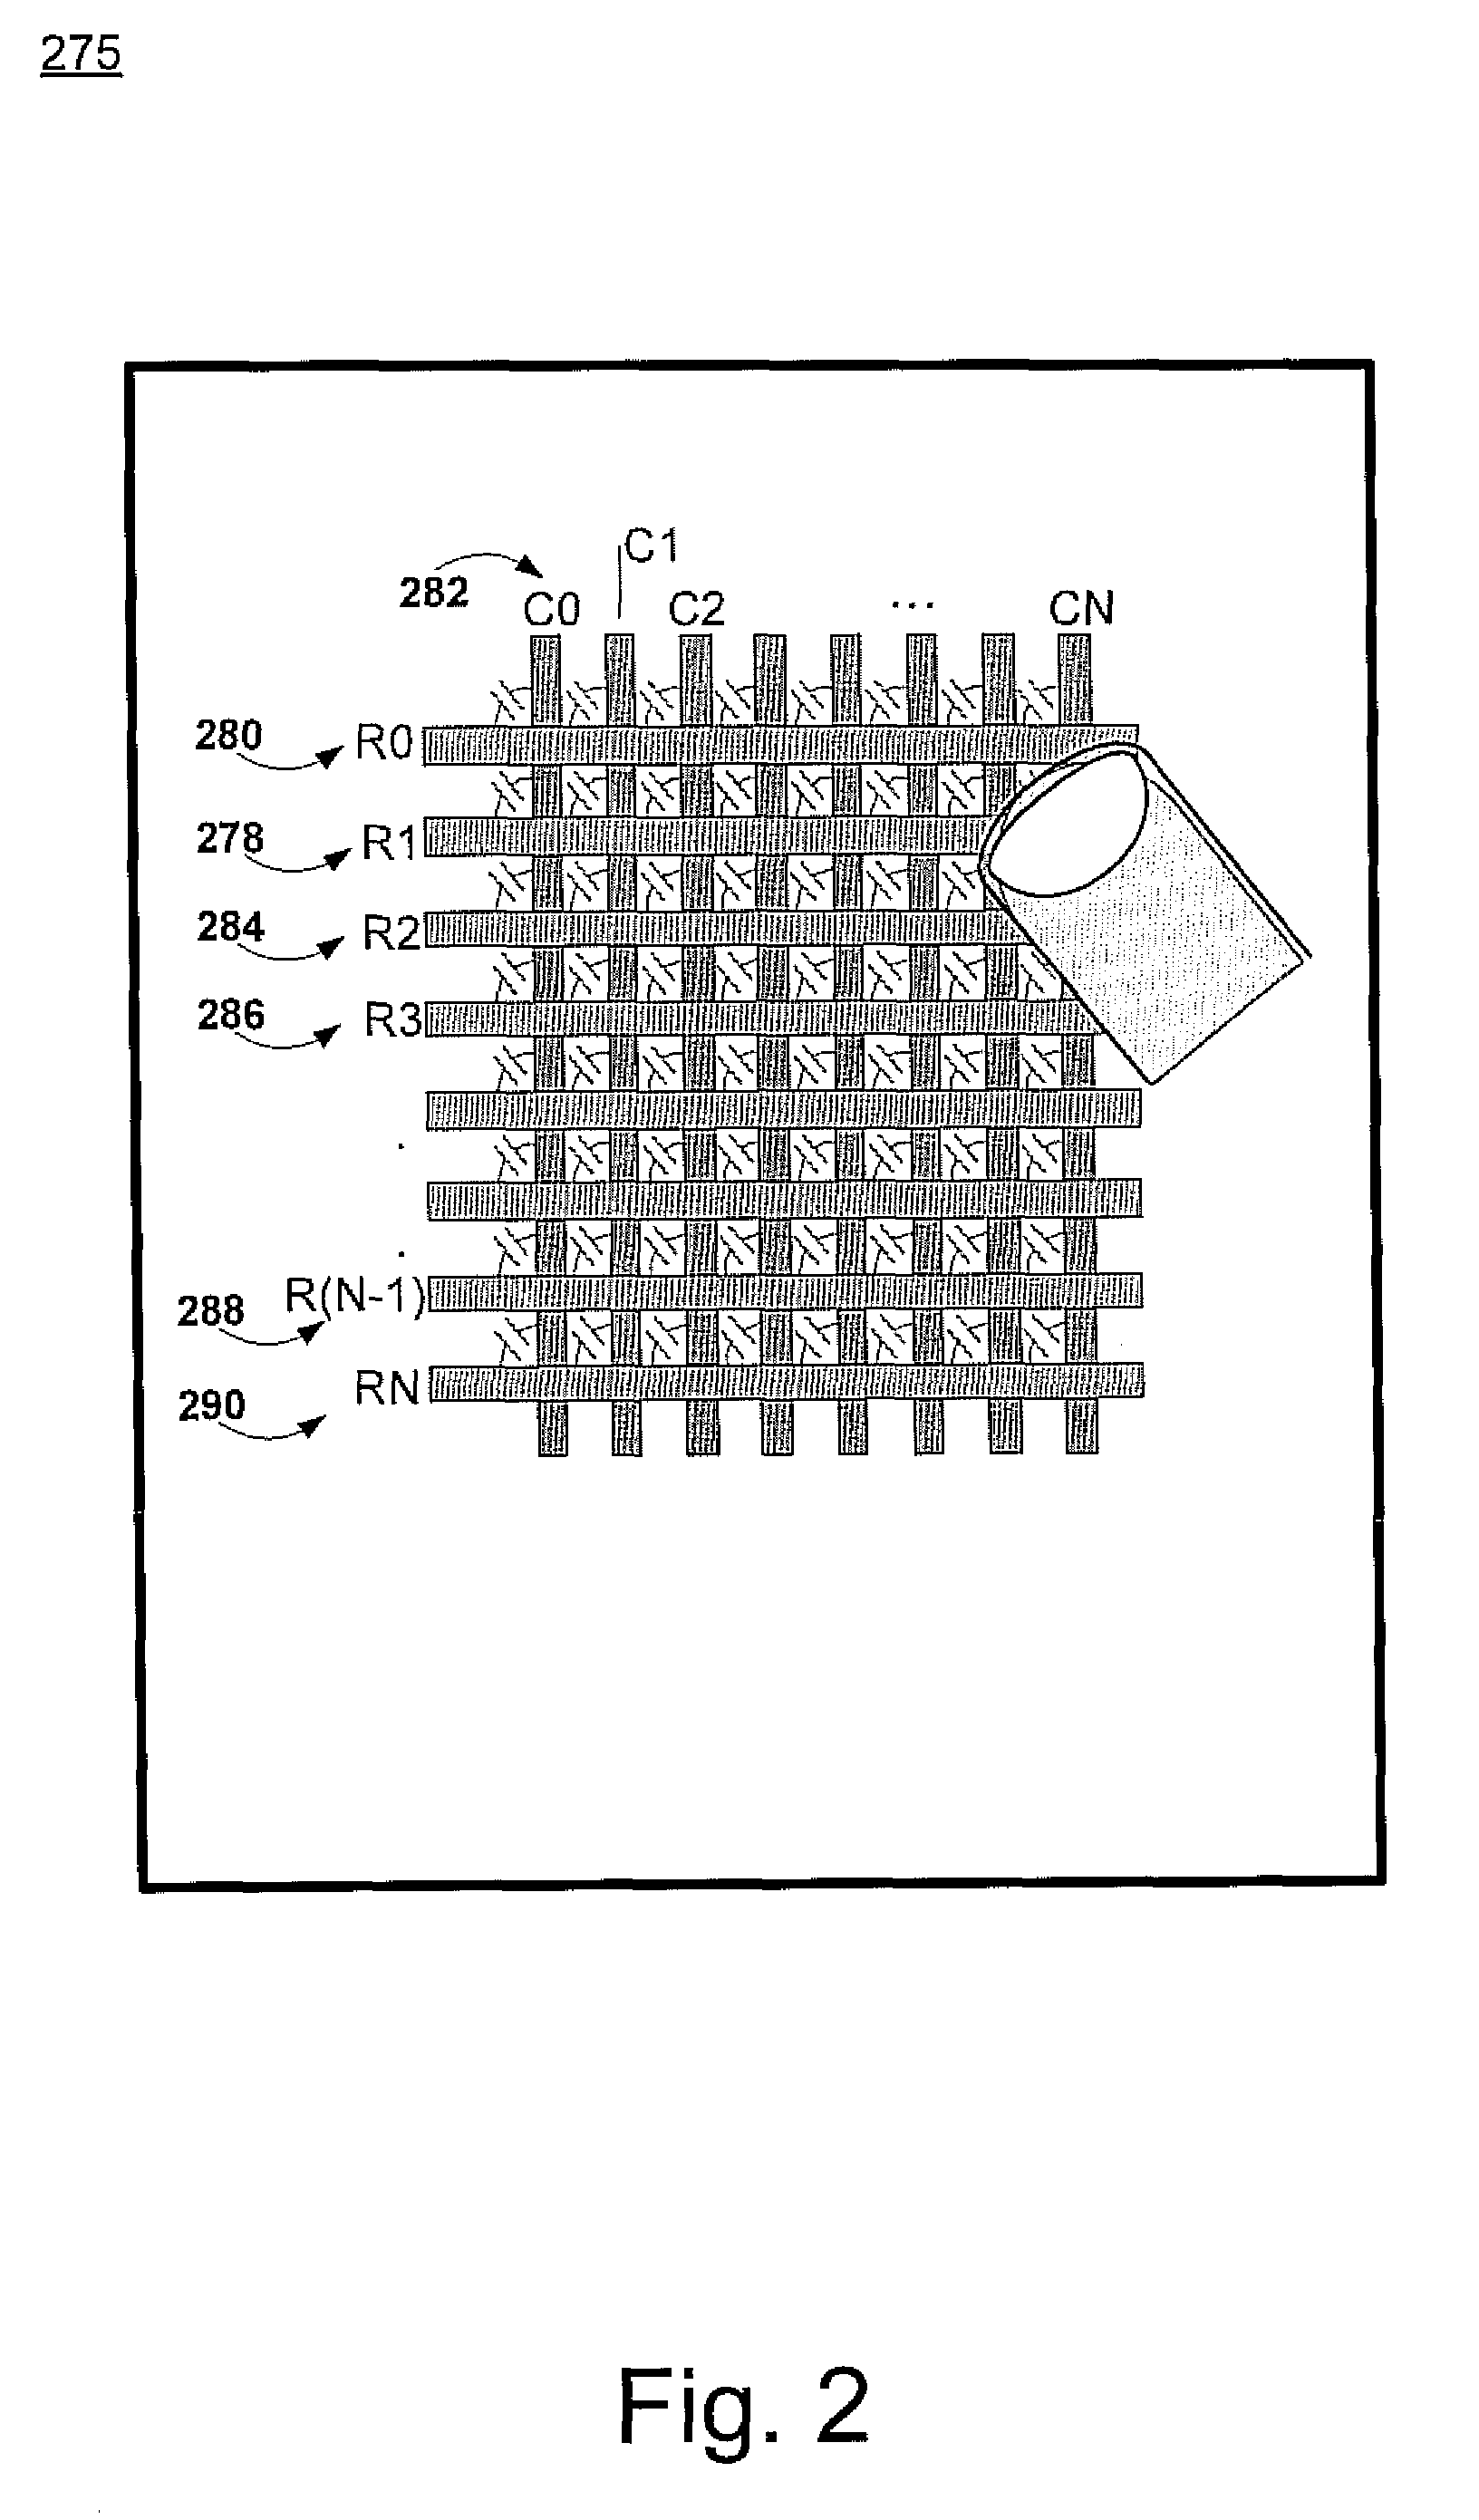 System and method to measure capacitance of capacitive sensor array